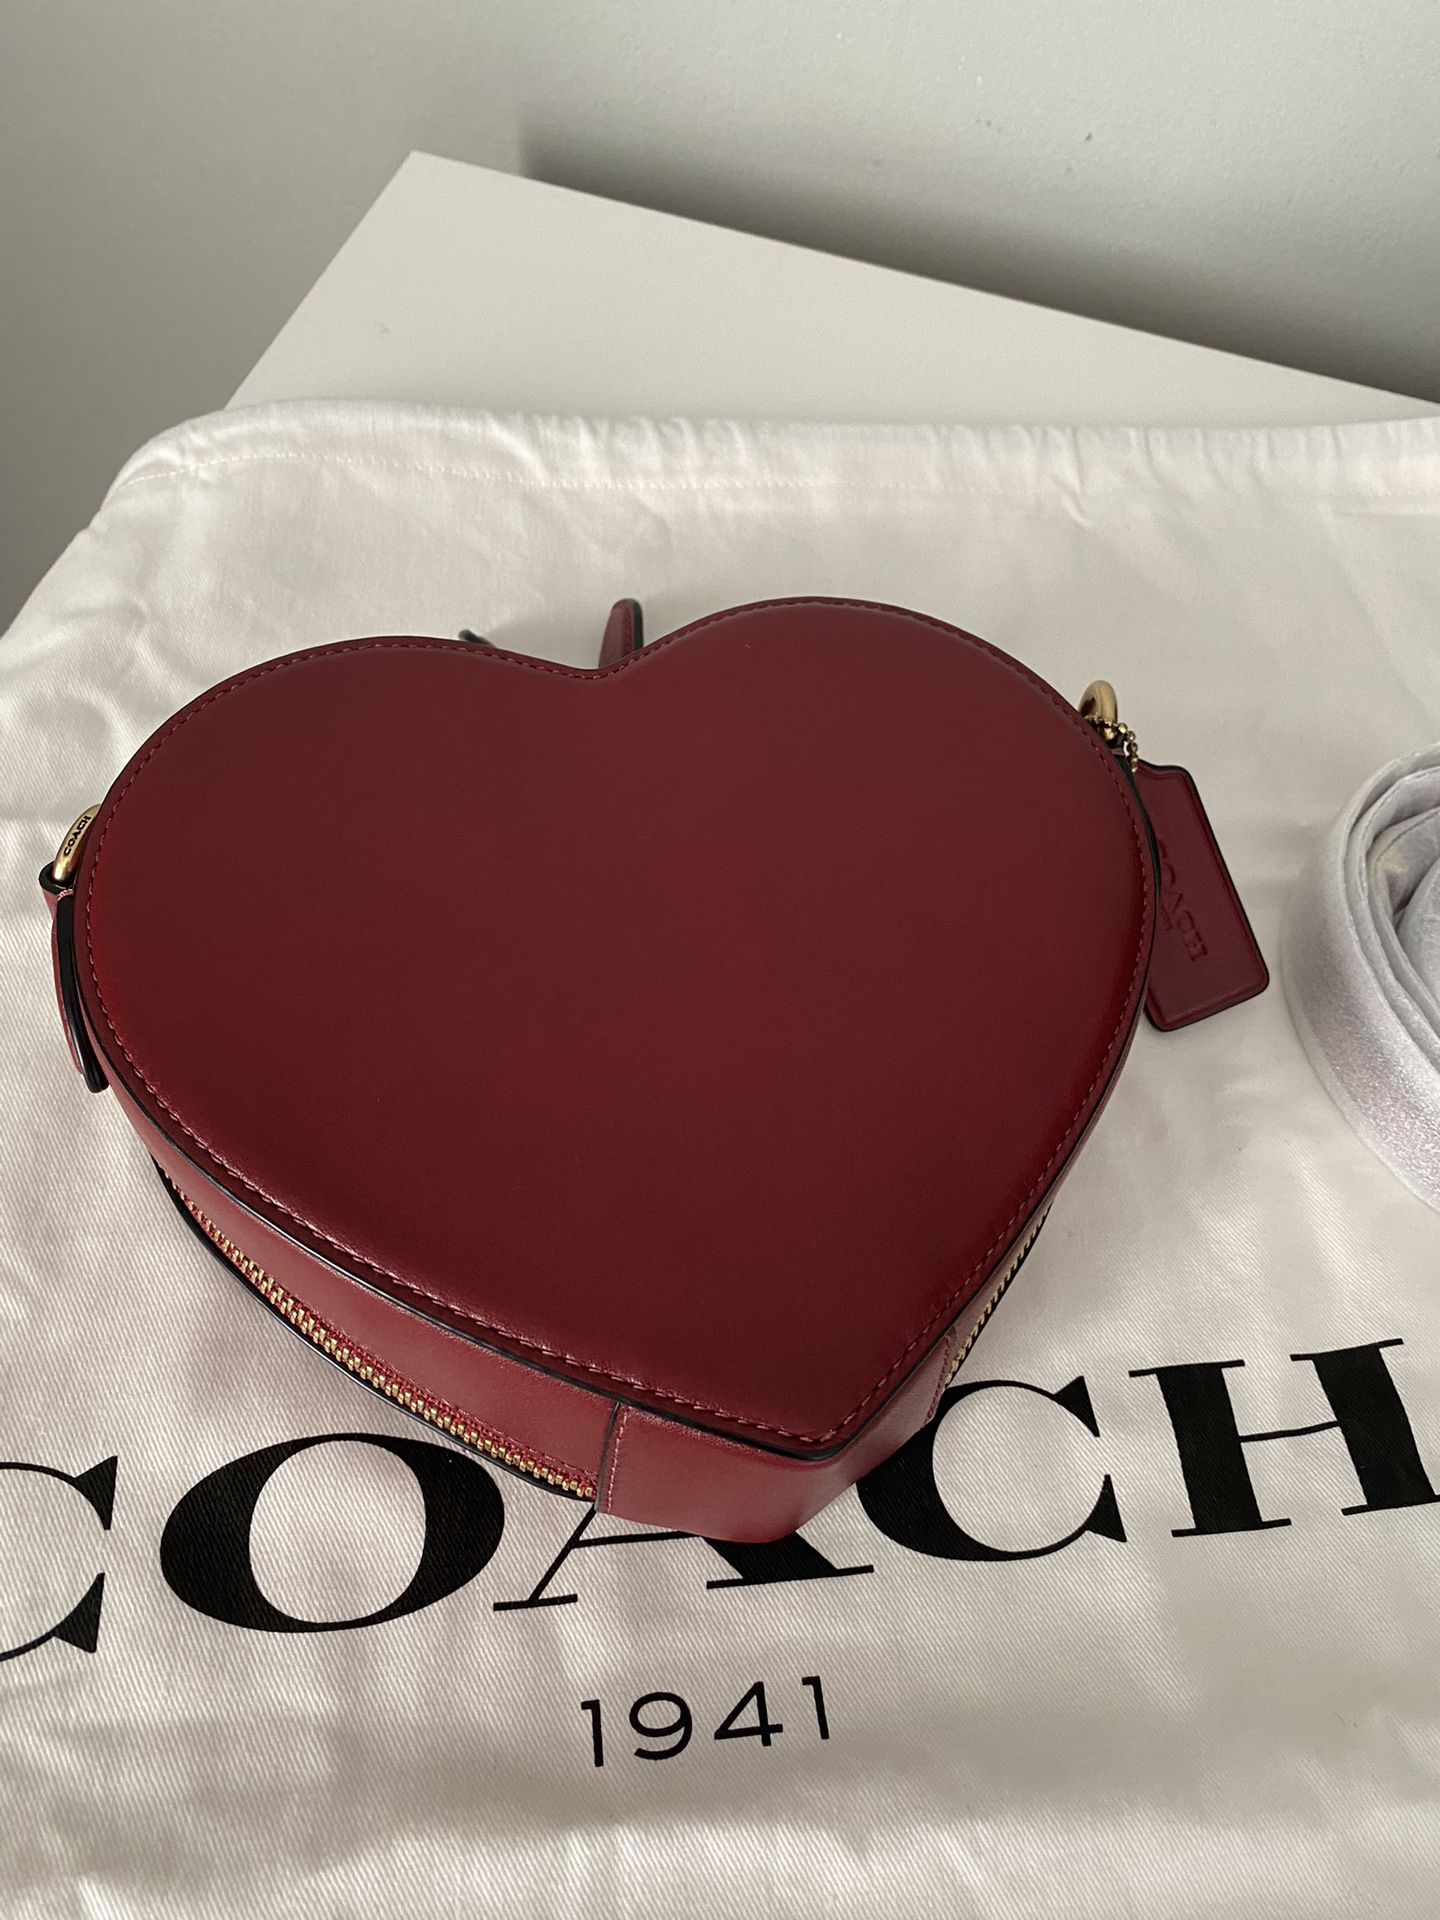 Coach Heart Crossbody Bag for Sale in Los Angeles, CA - OfferUp